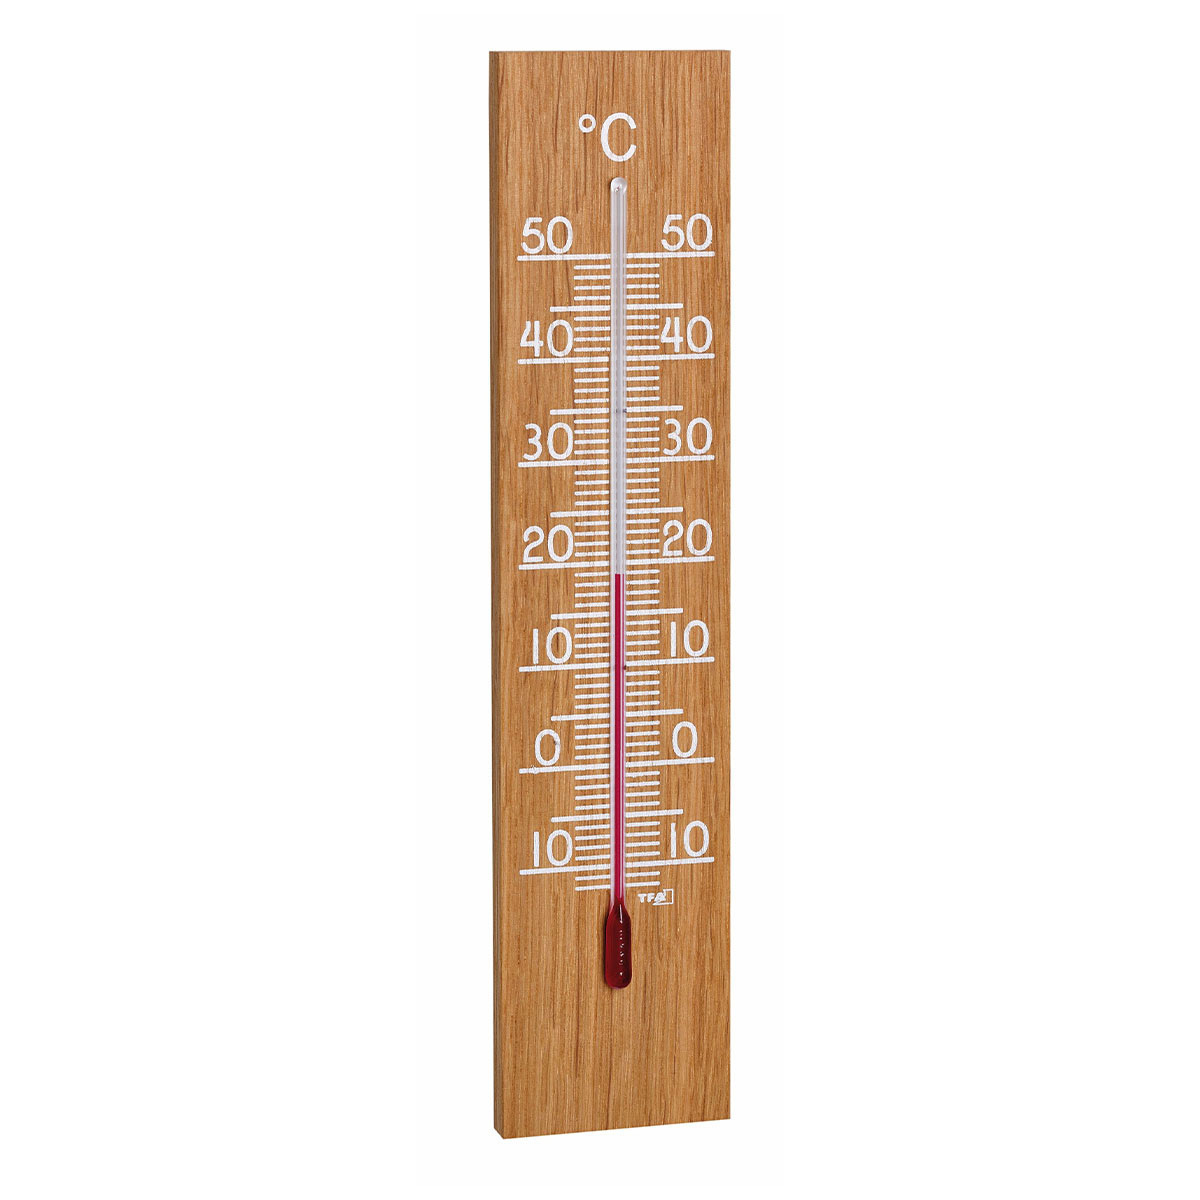 Analogue indoor-outdoor-thermometer made of oak